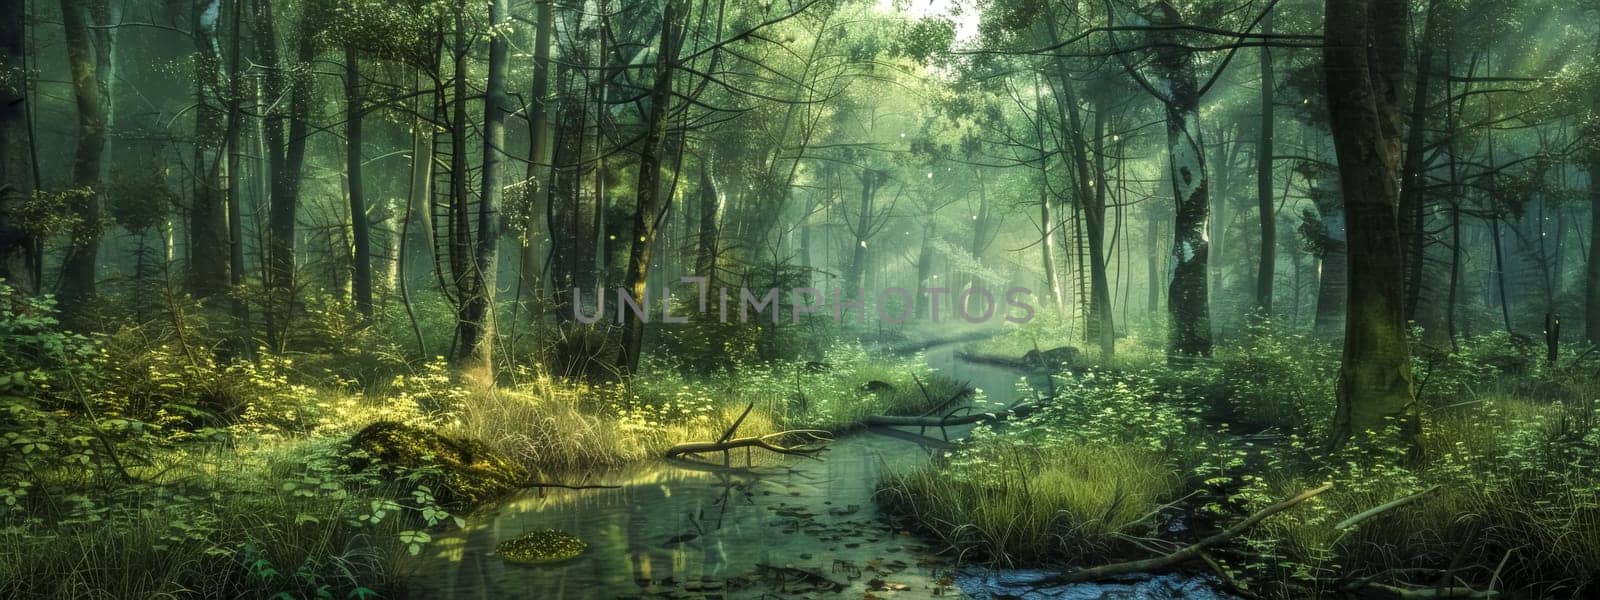 Panoramic view of a magical forest with mist and sunbeams filtering through trees